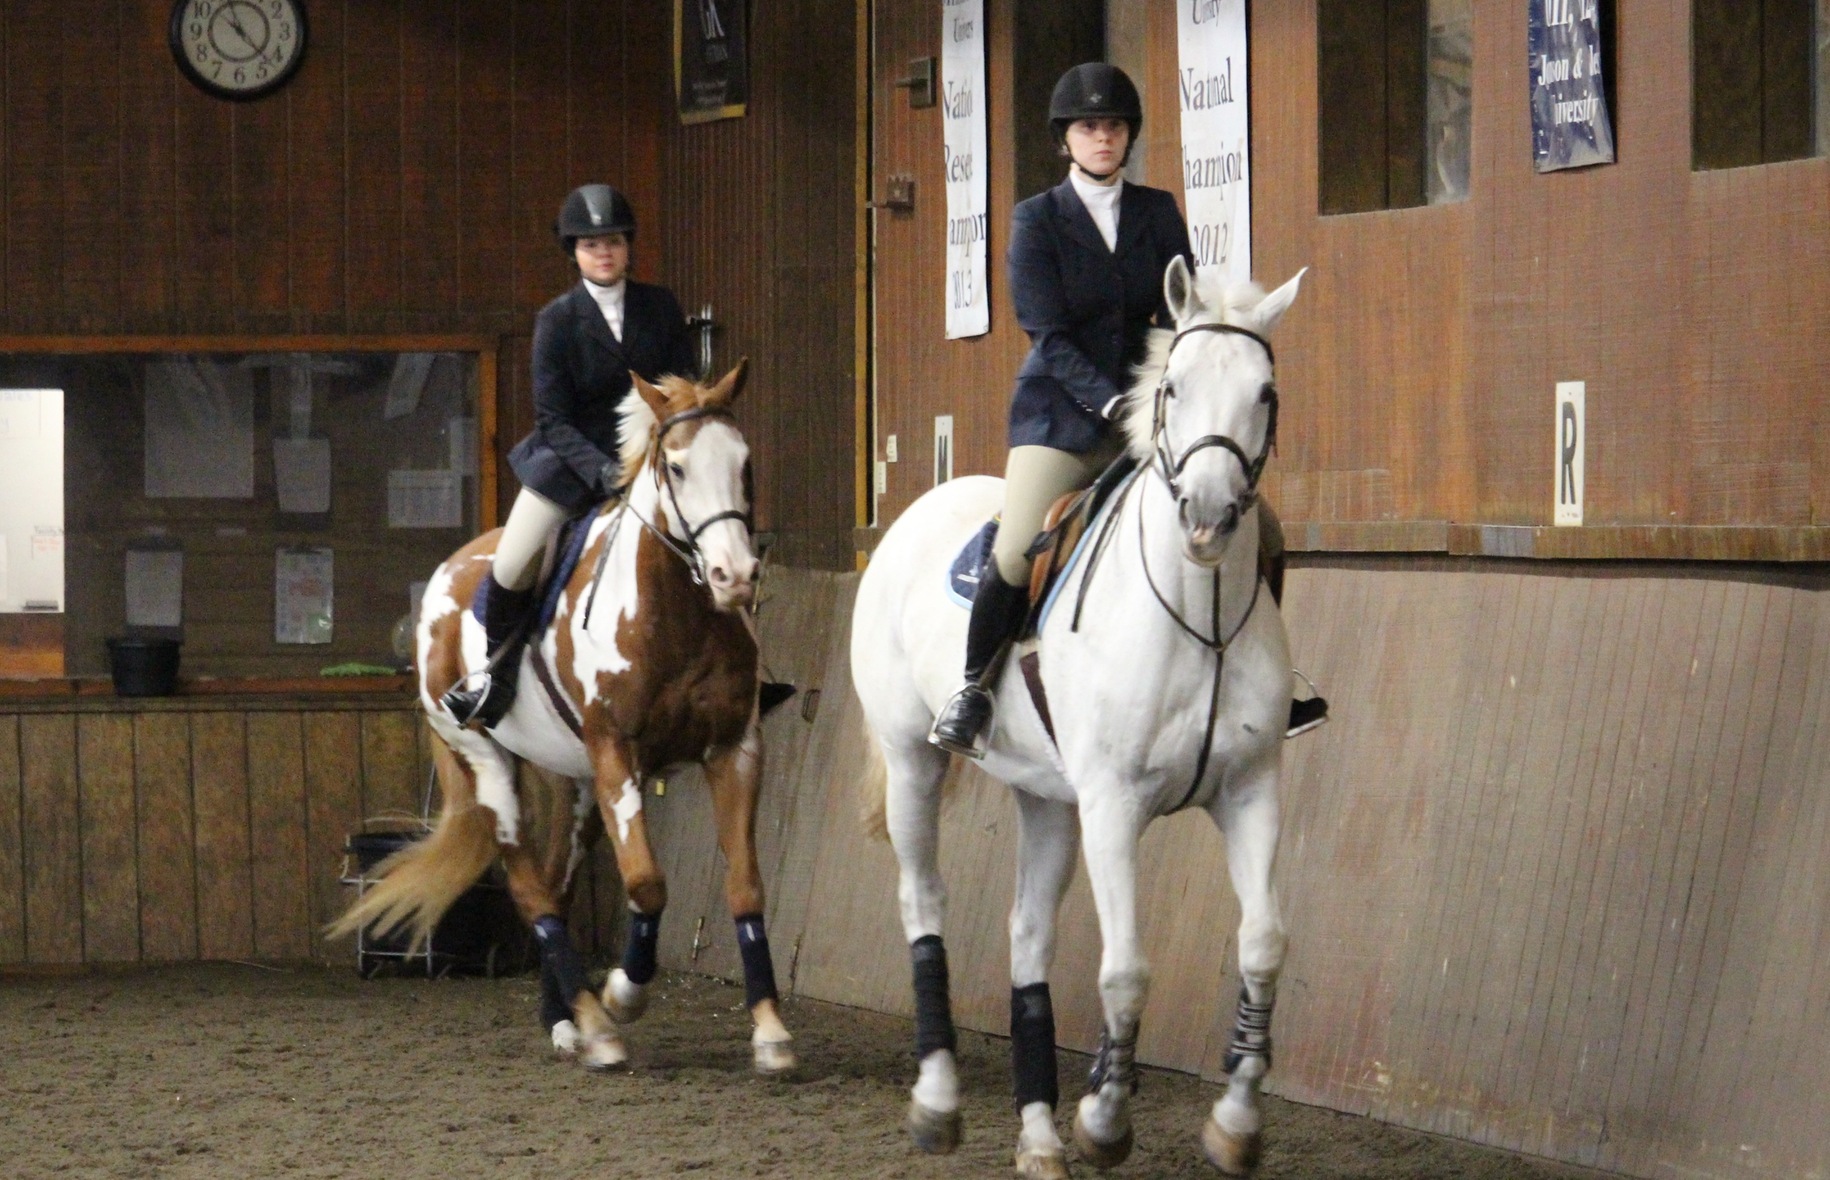 Equestrian Continues Strong Showing At UMass Dartmouth